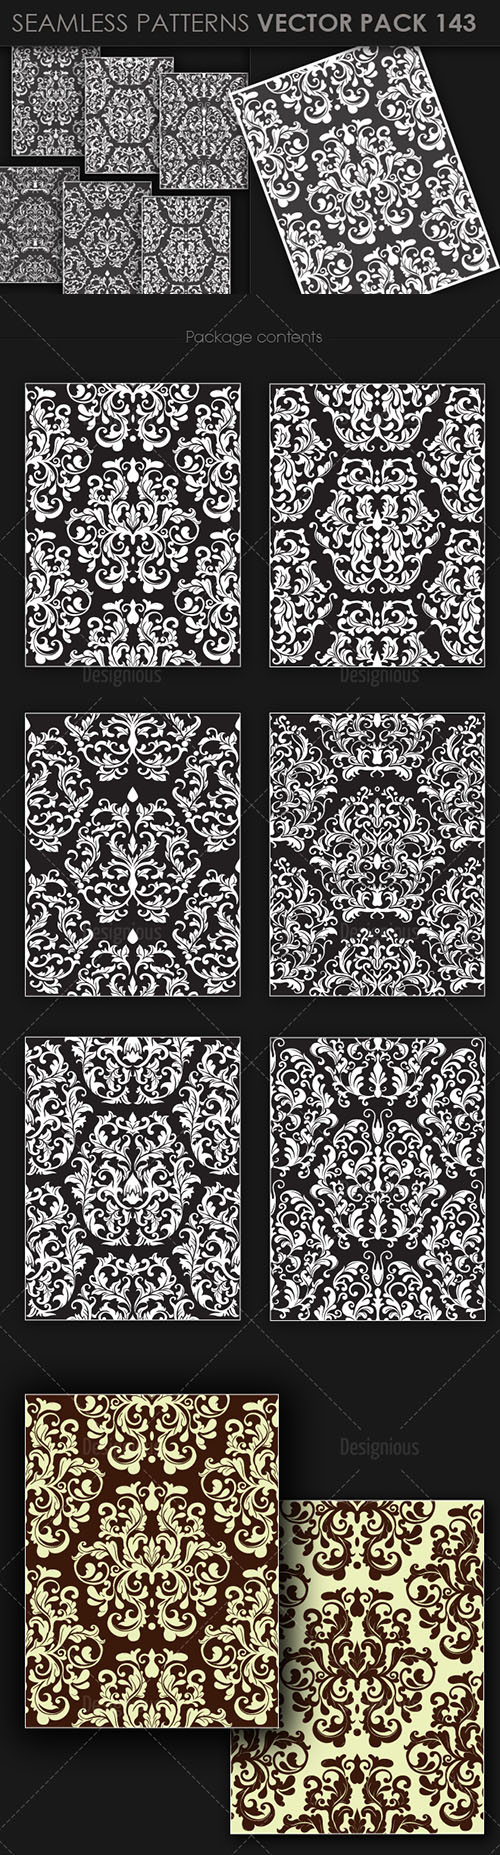 Seamless Patterns Vector Pack 143